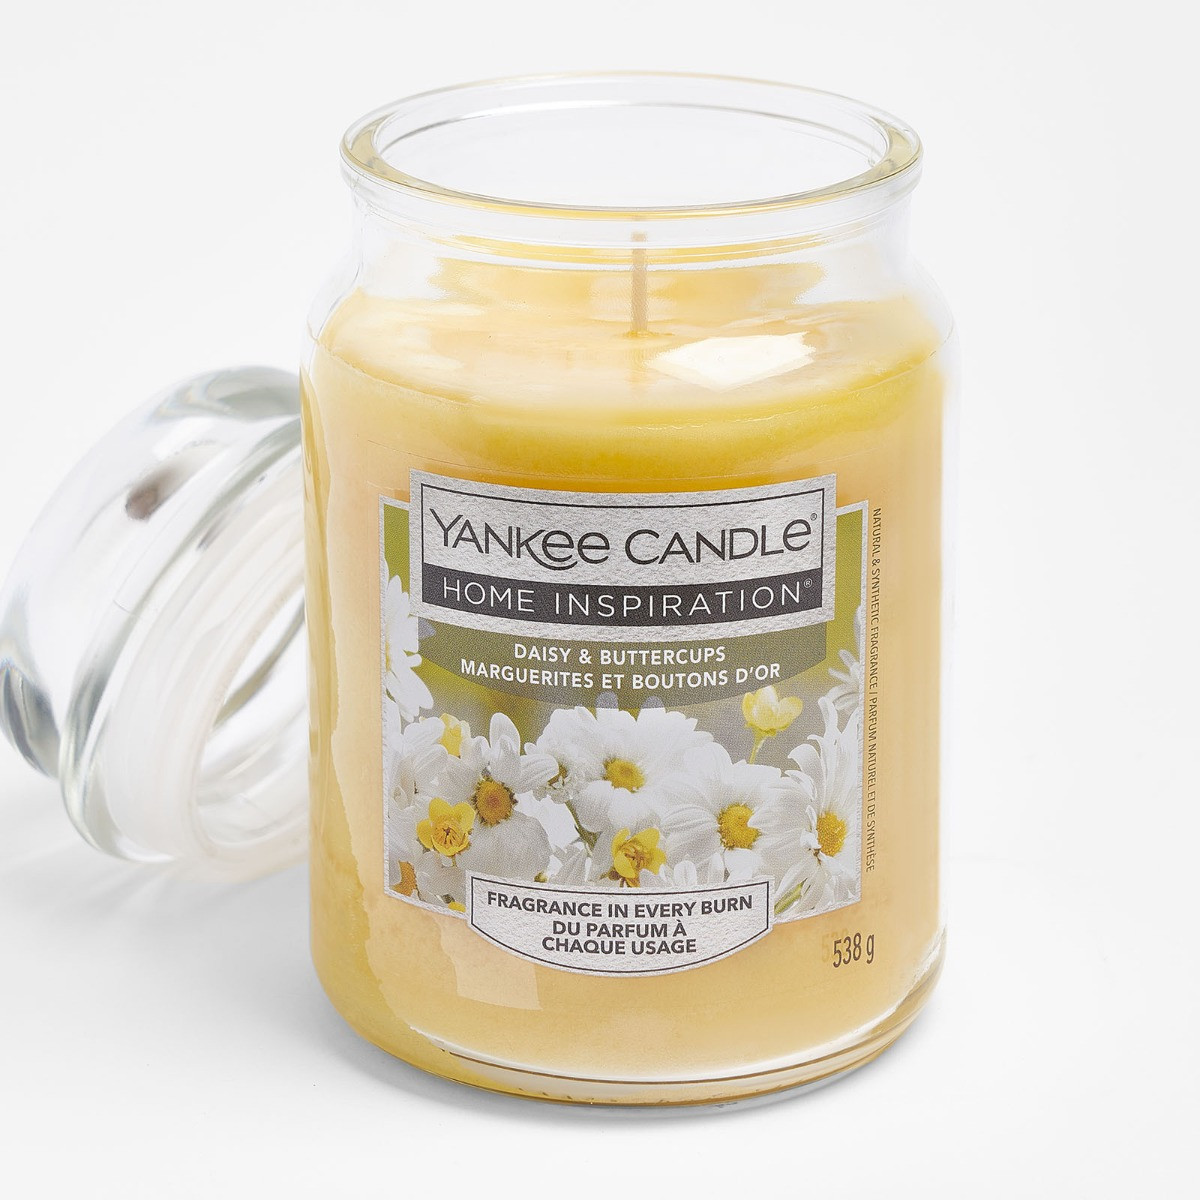 Yankee Candle Home Inspiration Large Jar - Daisy & Buttercups>